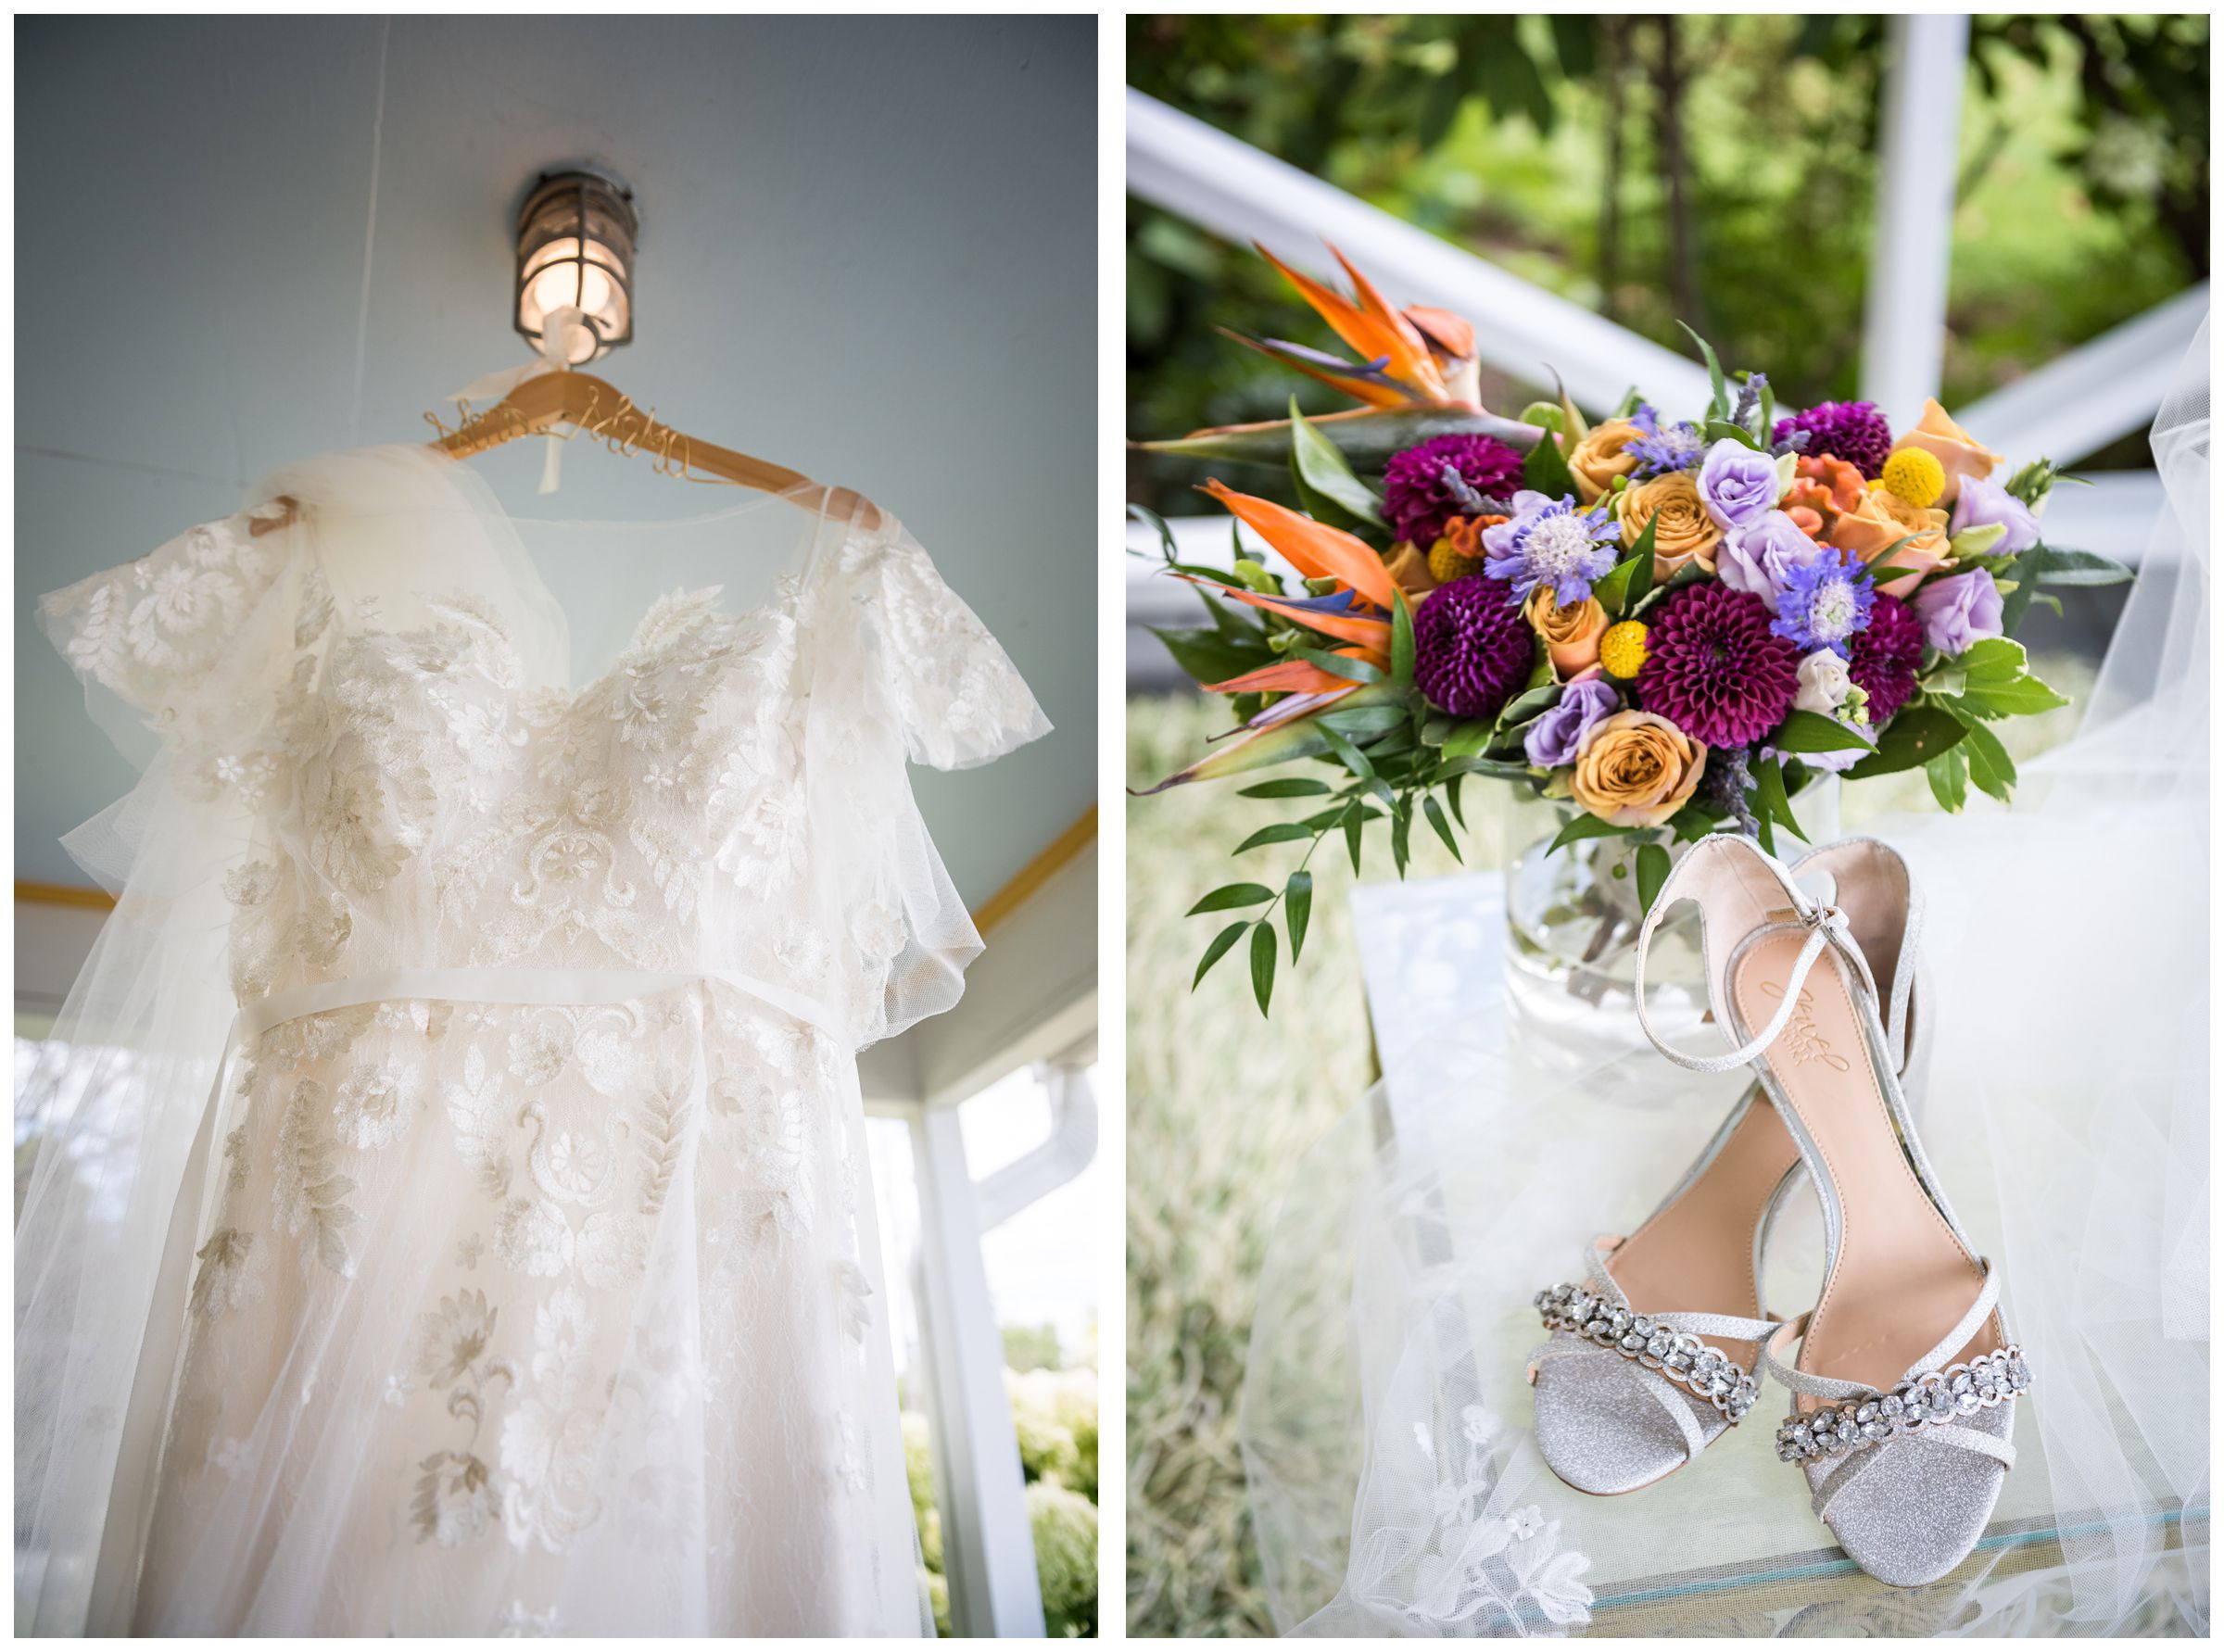 wedding dress with lace flutter sleeves and custom dress hanger, colorful purple and yellow bridal bouquet, silver shoes